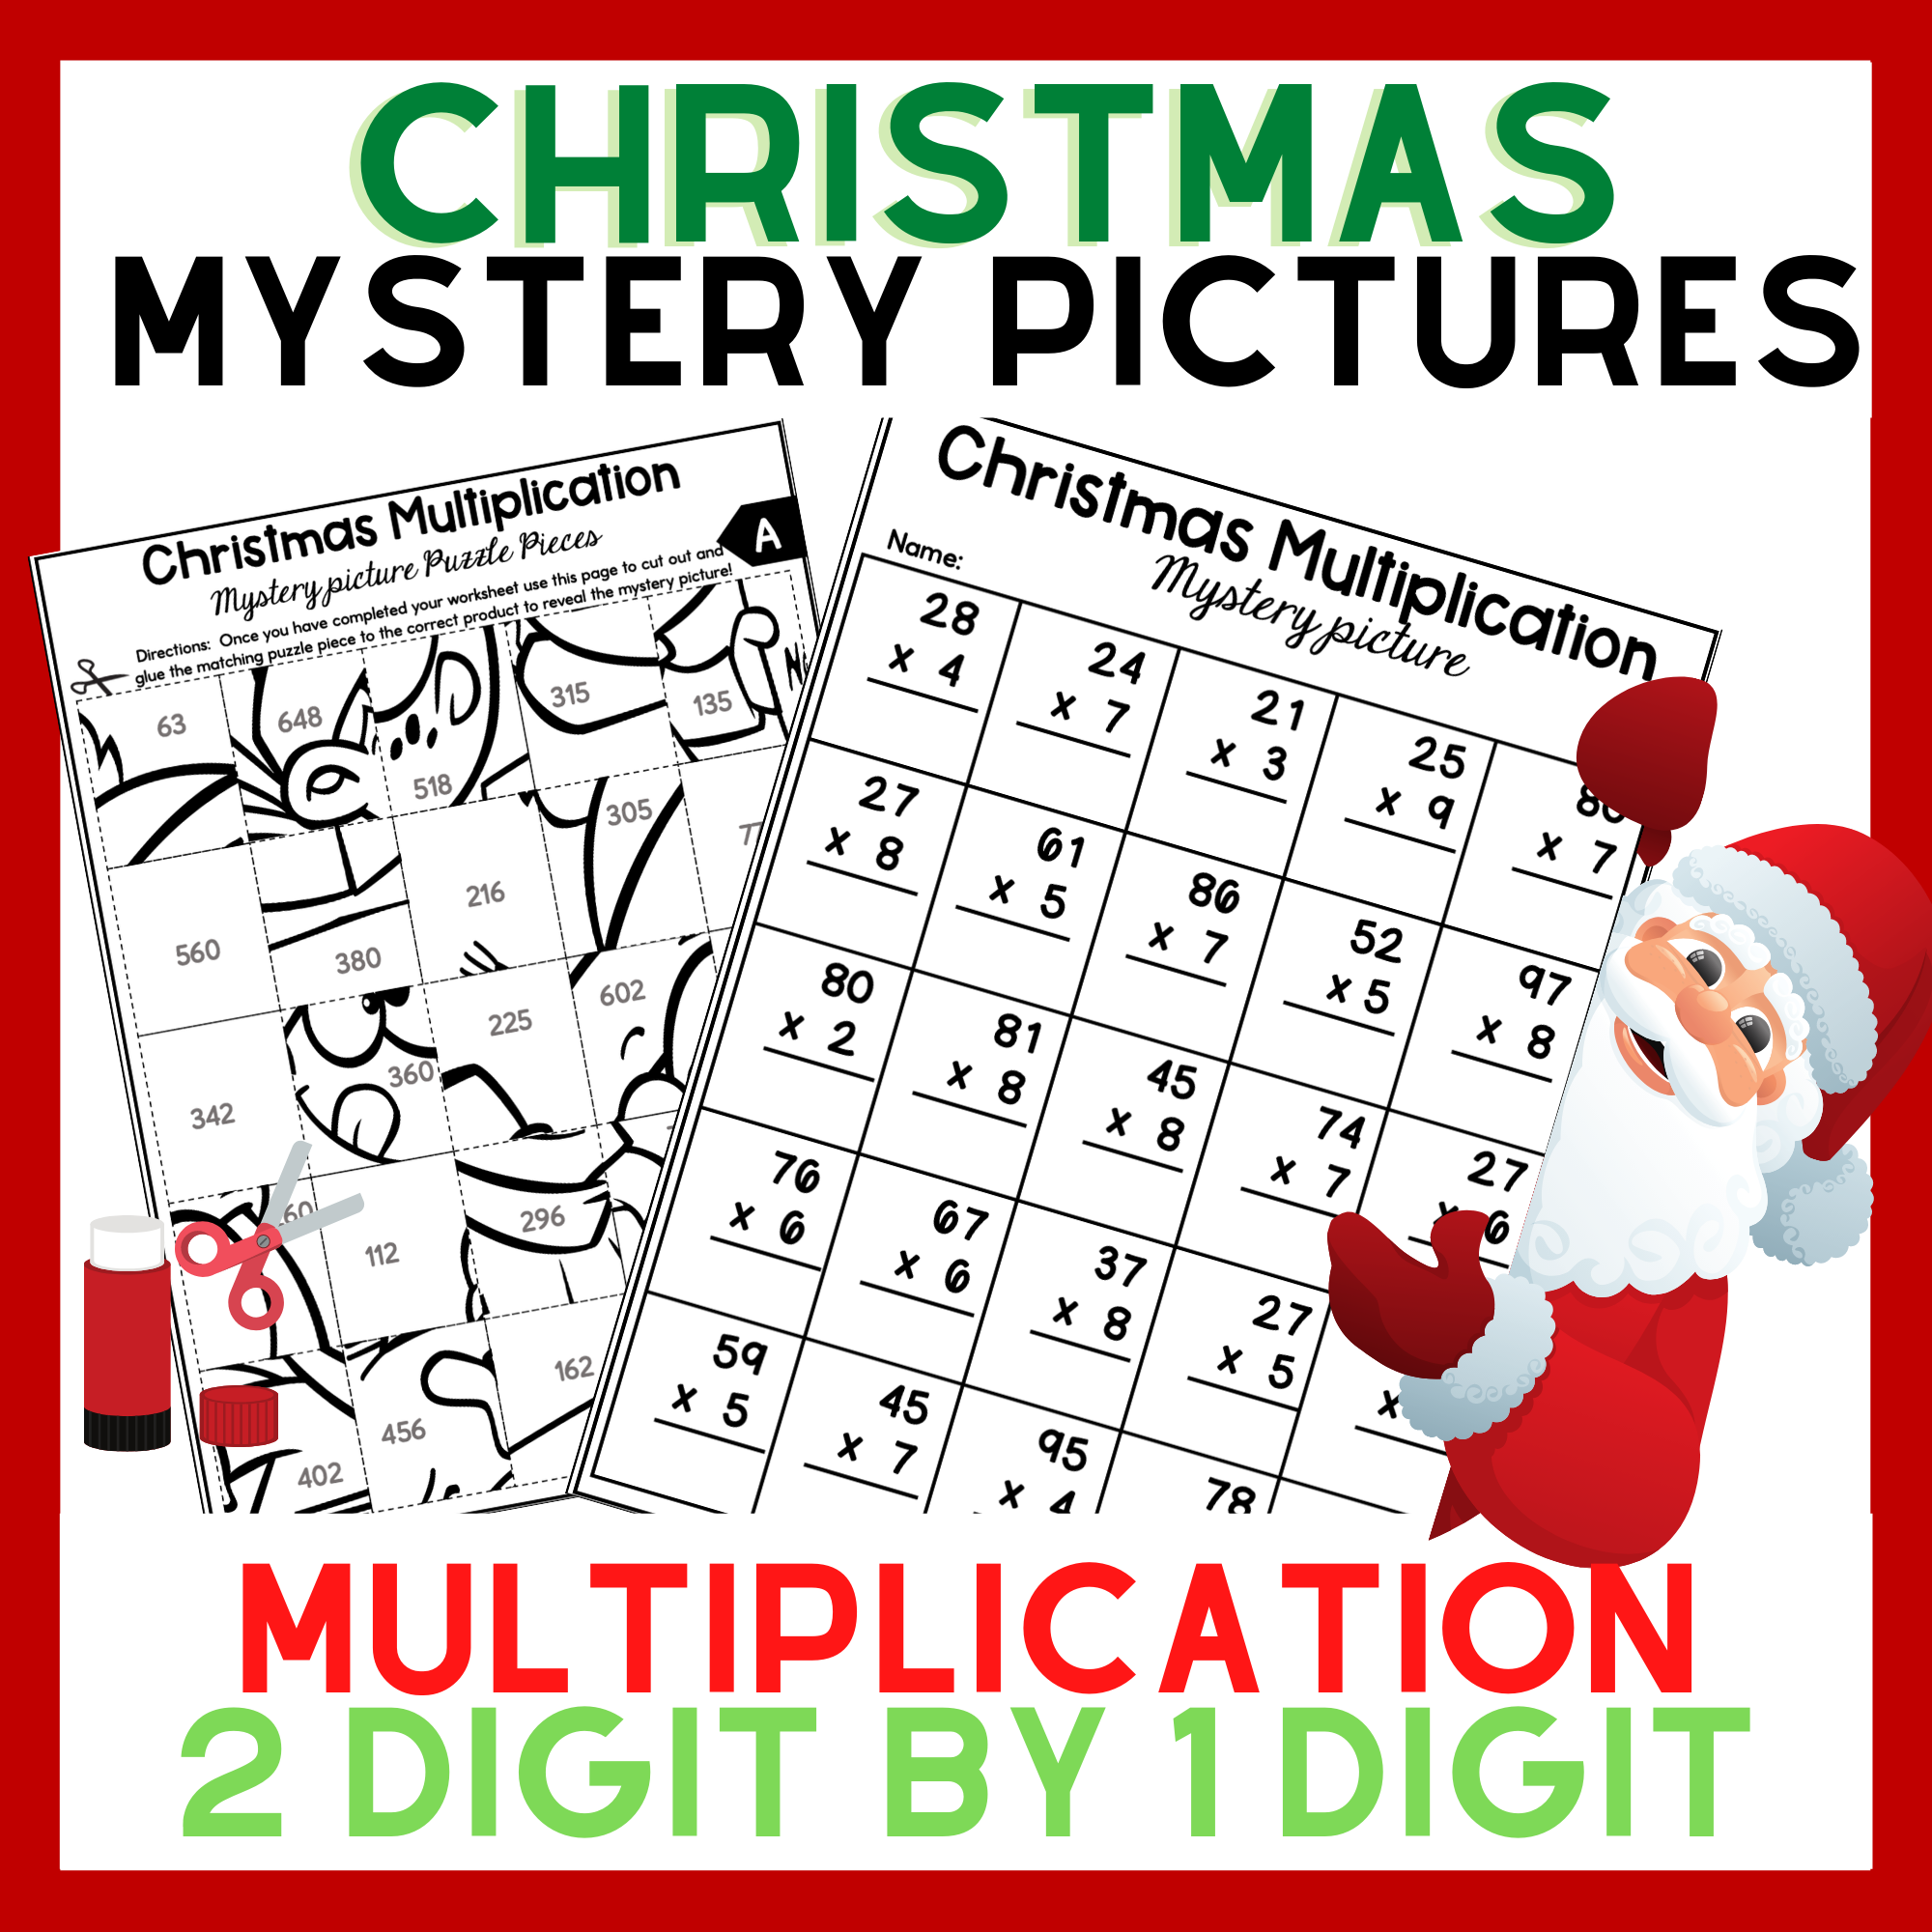 Christmas 2 digit by 1 digit multiplication Mystery Pictures